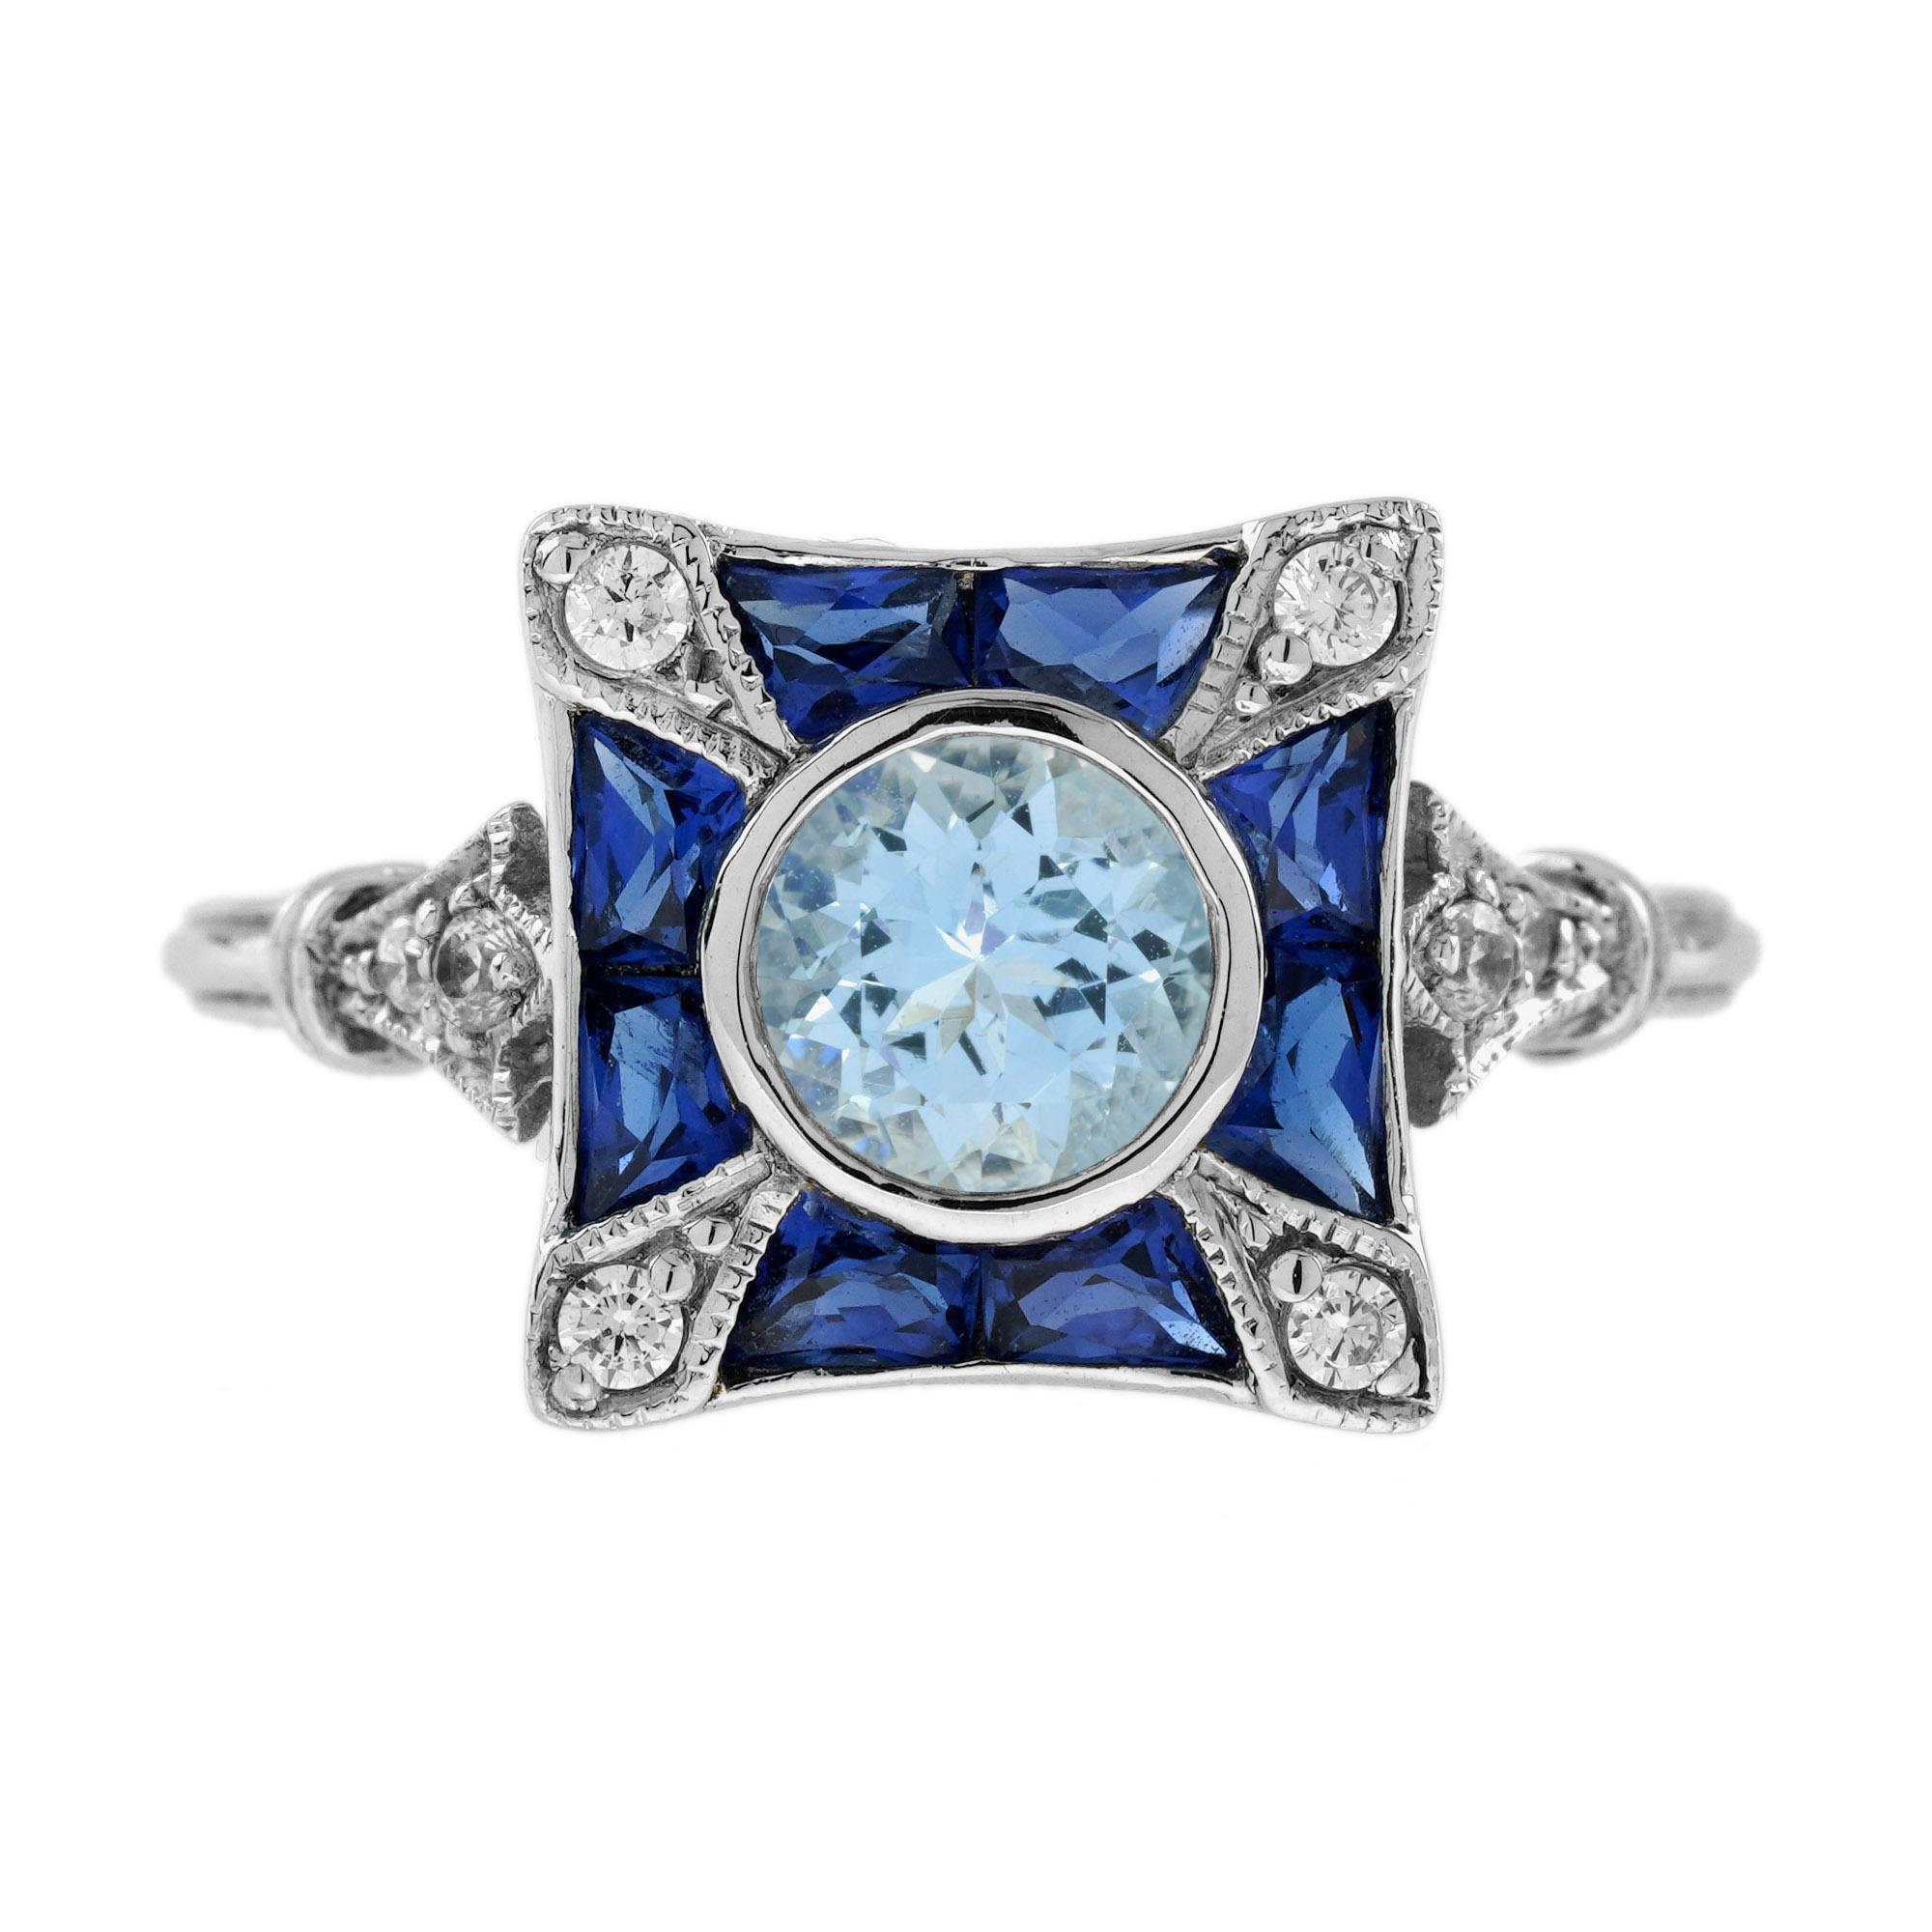 Aquamarine Diamond and Blue Sapphire Art Deco Style Engagement Ring in 18K Gold